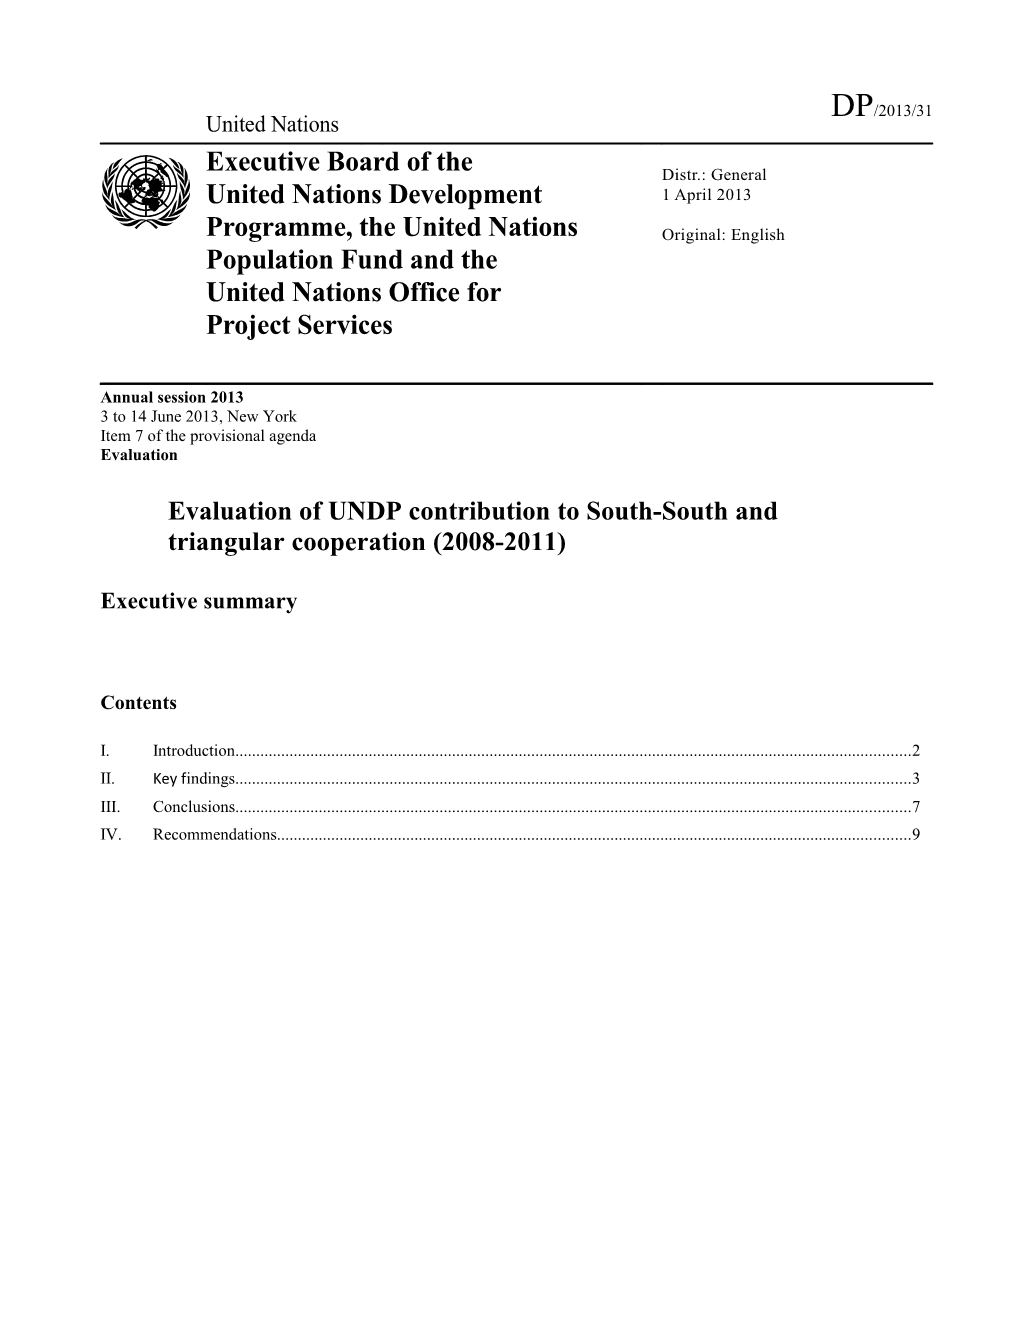 Evaluation of UNDP Contribution to South-South and Triangularcooperation (2008-2011)